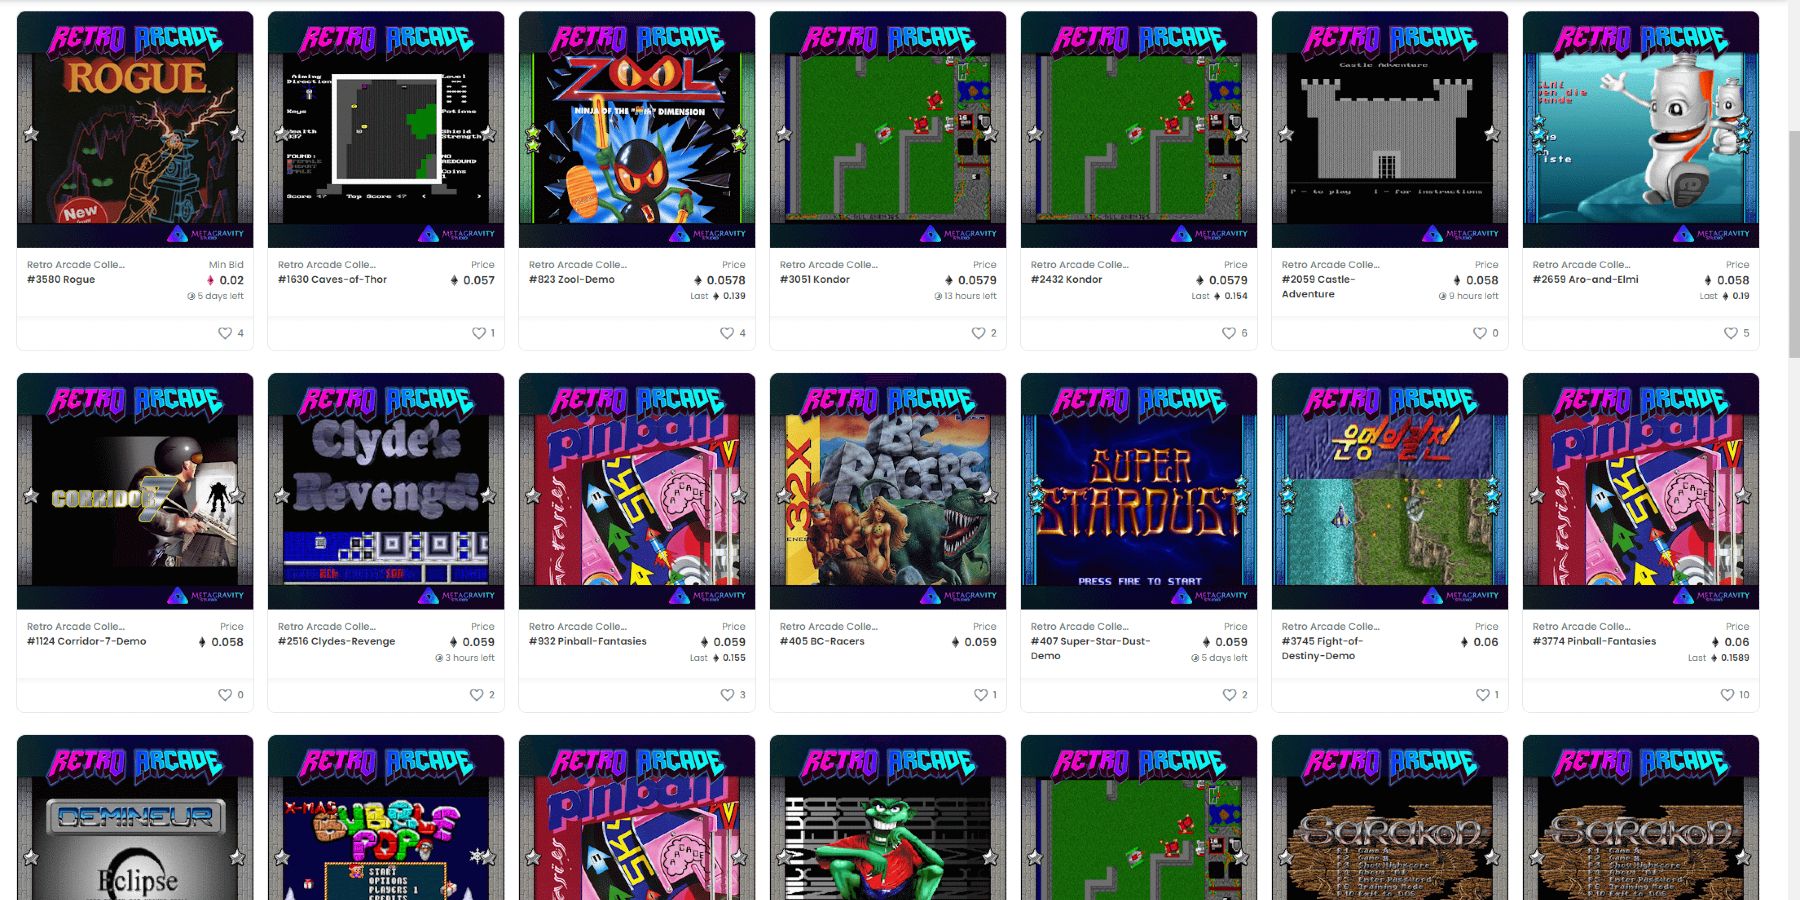 MetaGravity's Retro Arcade Collection of NFTs